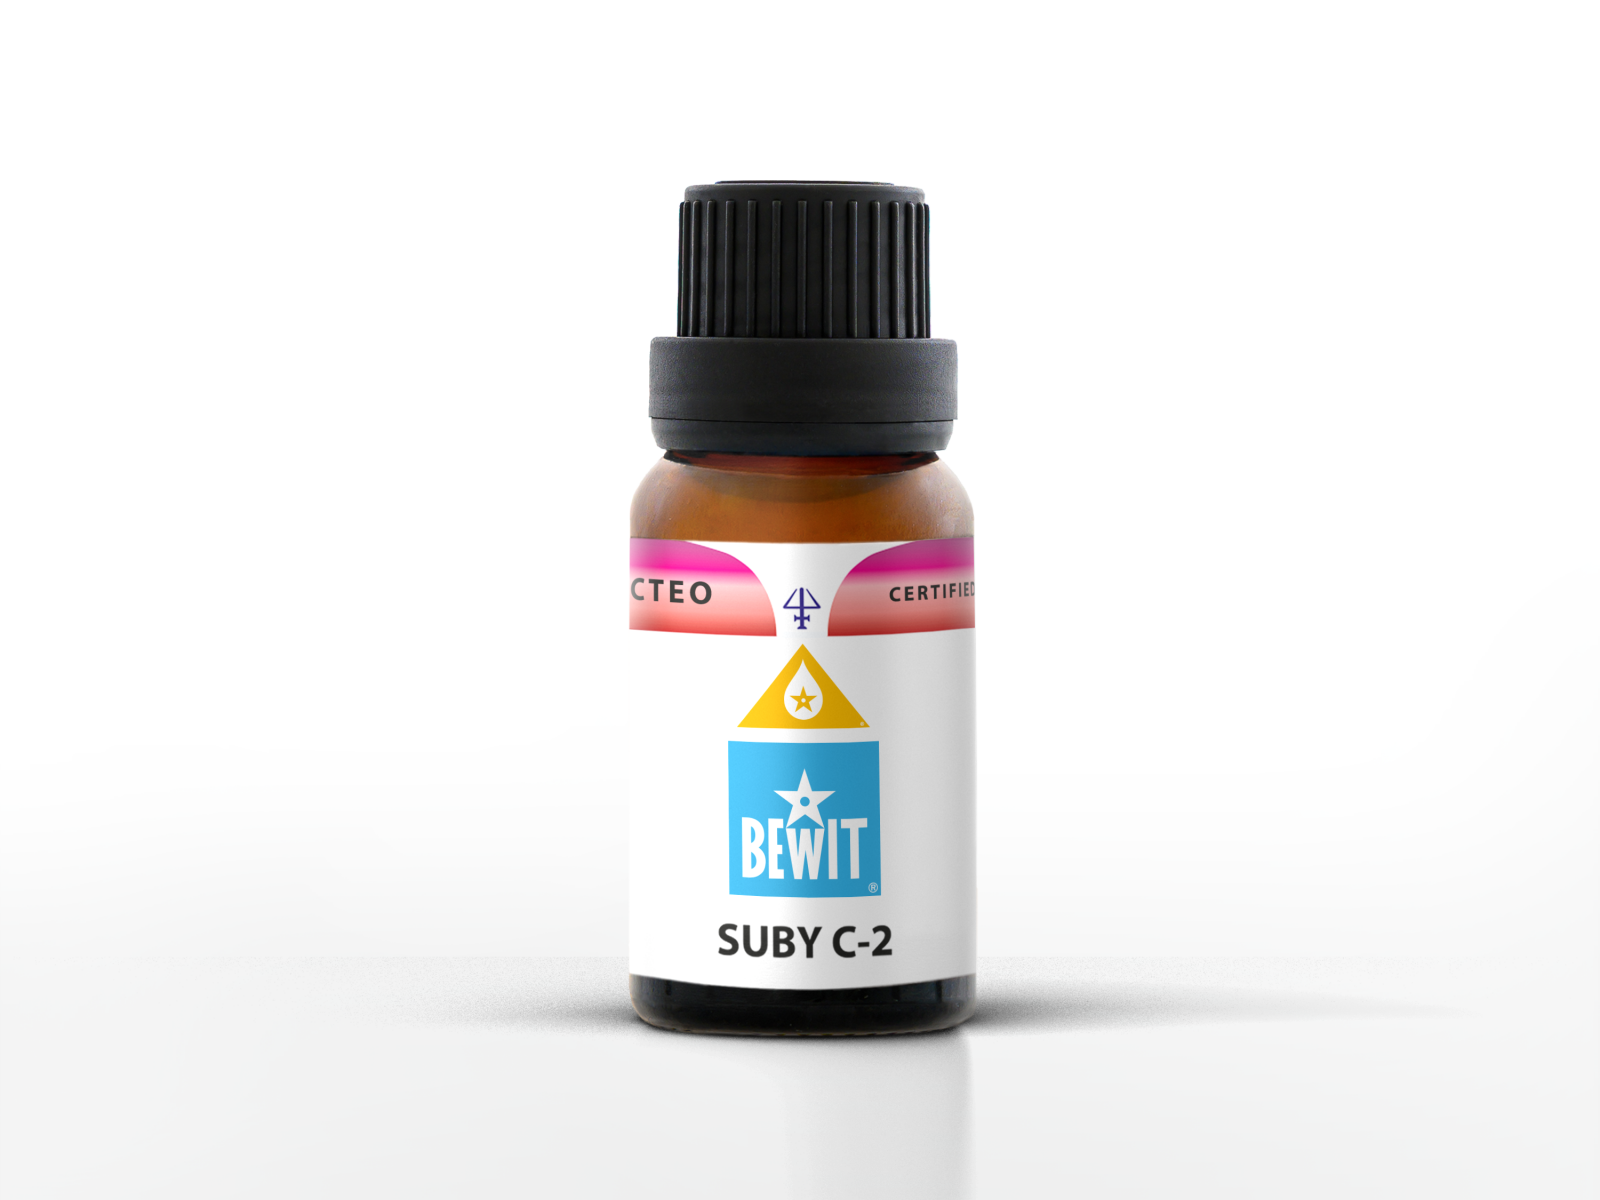 BEWIT SUBY C-2 - A blend of essential oils